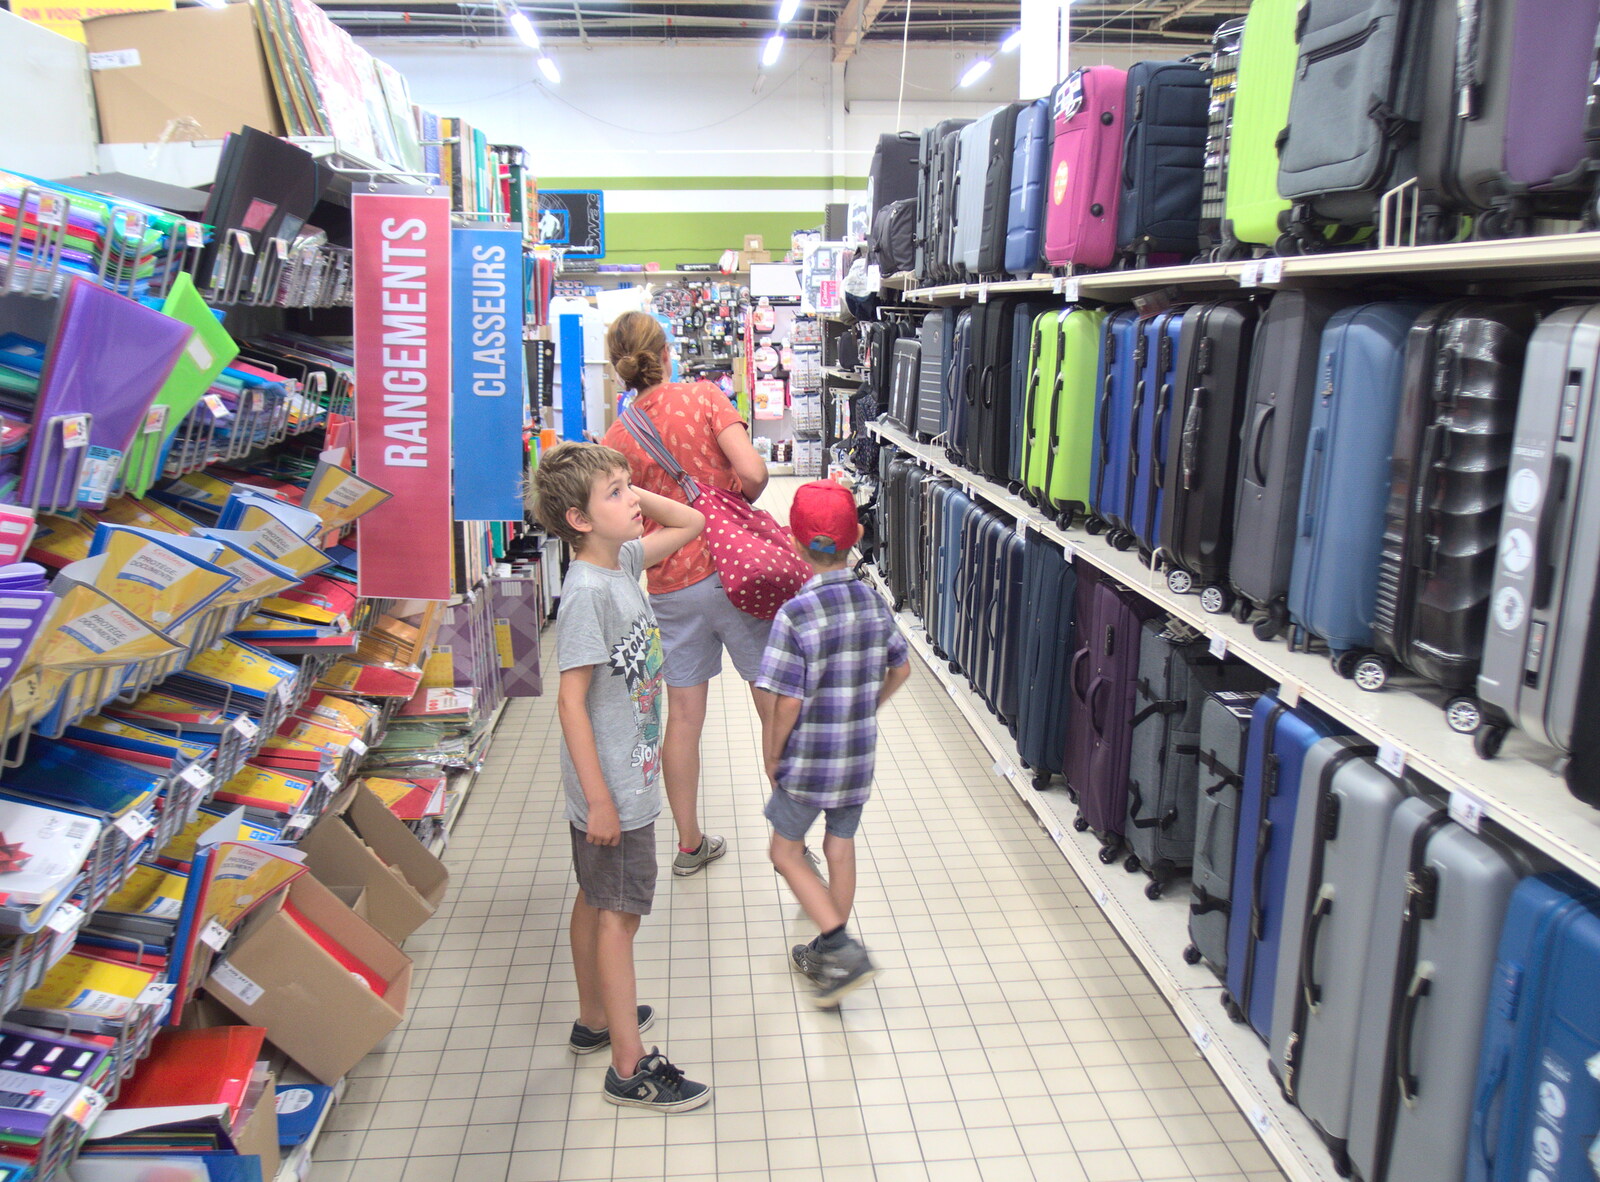 Isobel looks for luggage in Casino hypermarché from The Château Comtal, Lastours and the Journey Home, Carcassonne, Aude, France - 14th August 2018